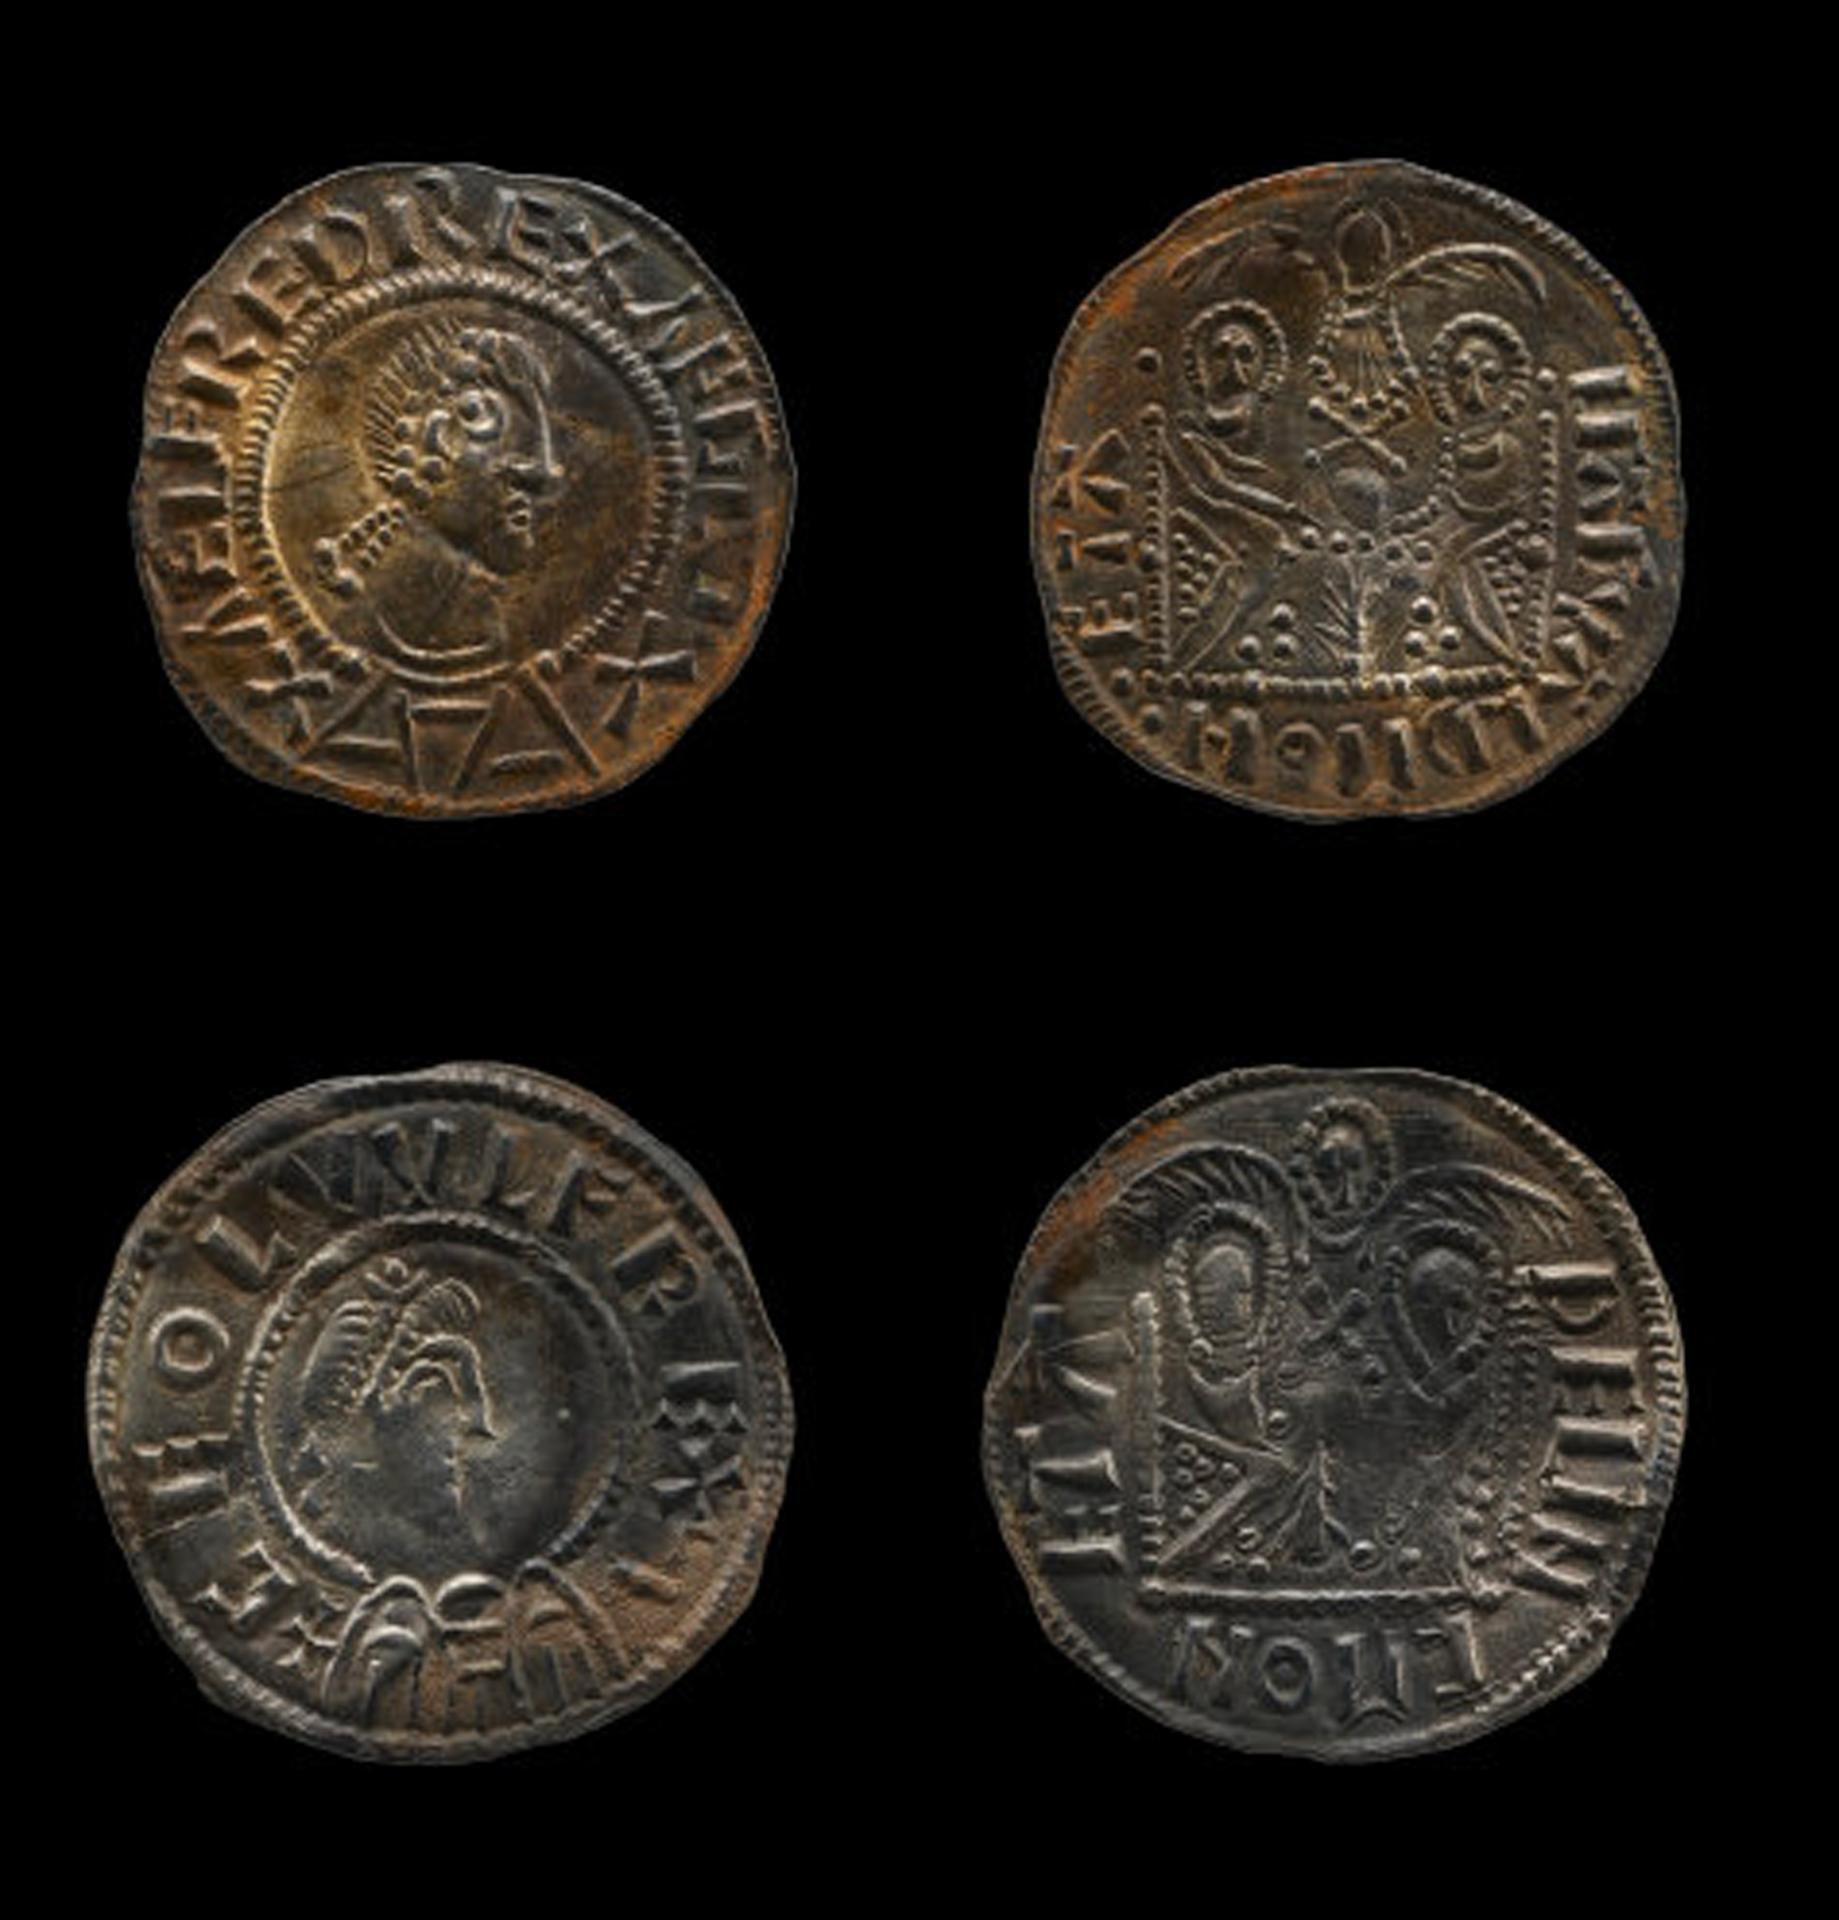 Herefordshire Hoard coins